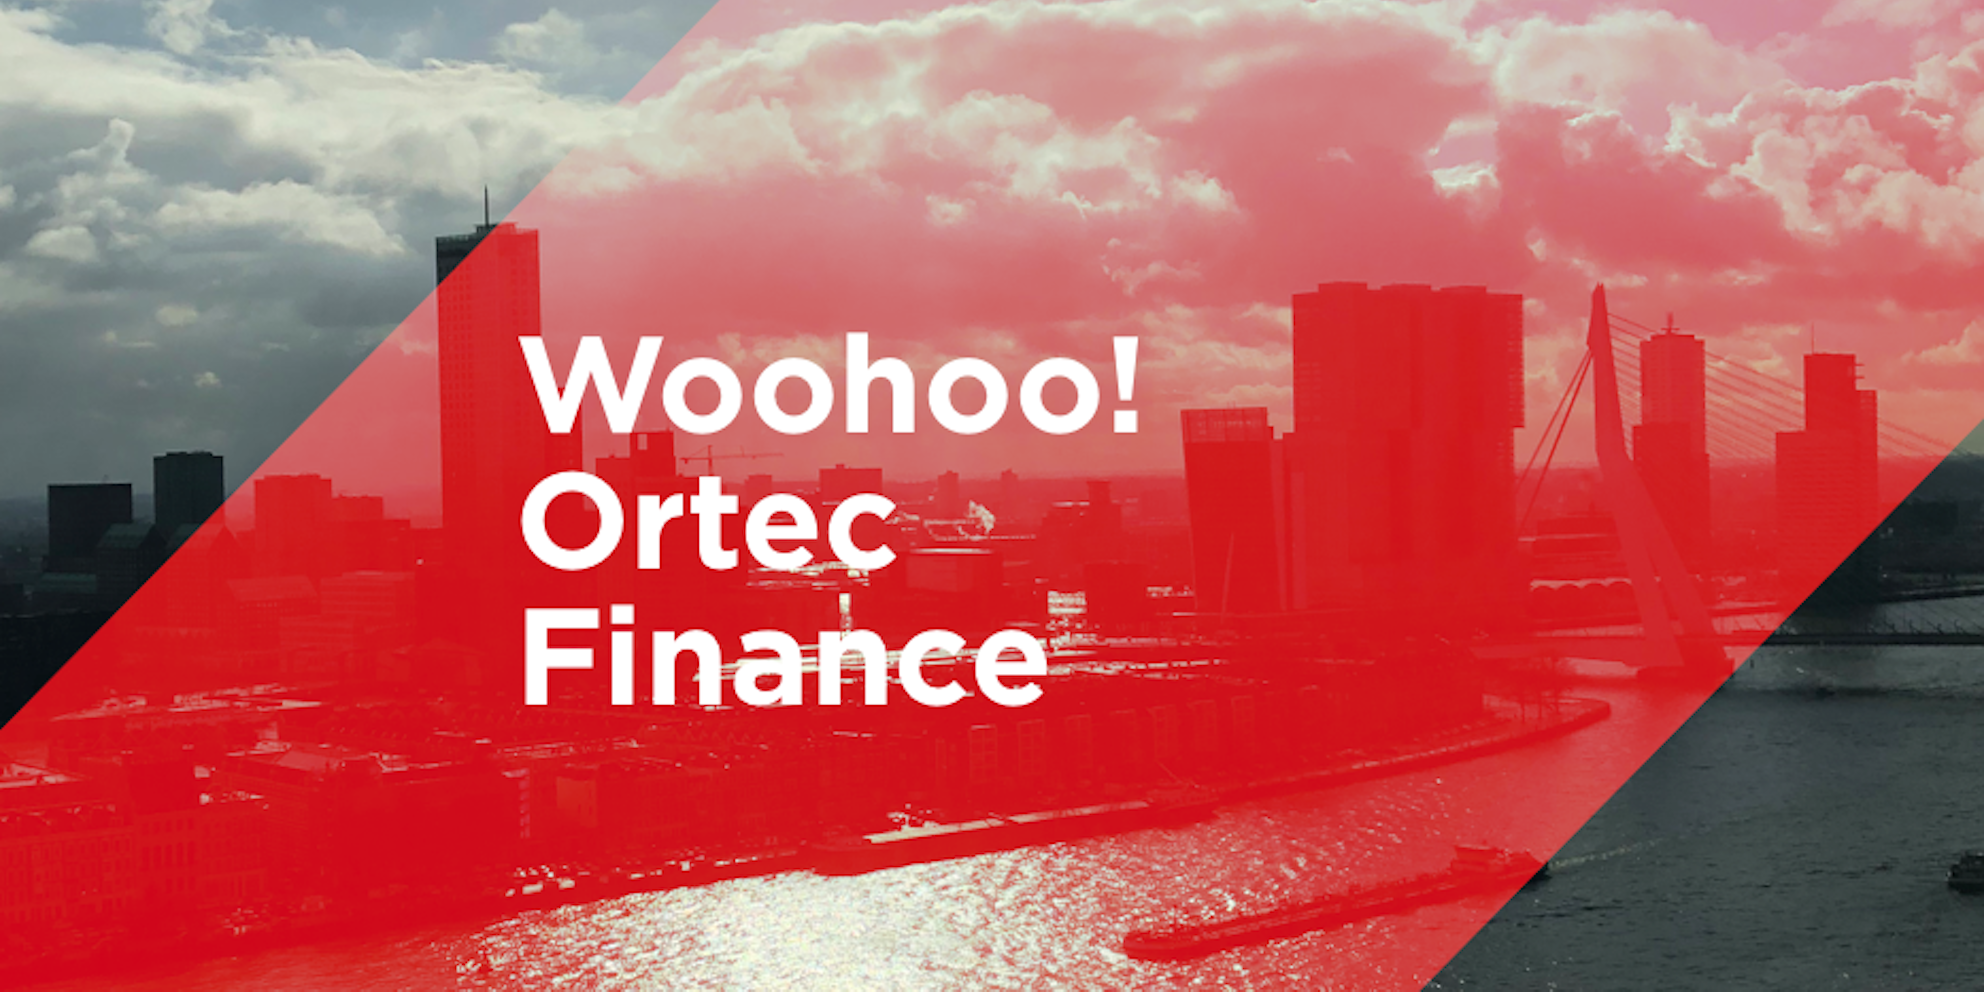 Conclusion Digital wint pitch voor Ortec Finance